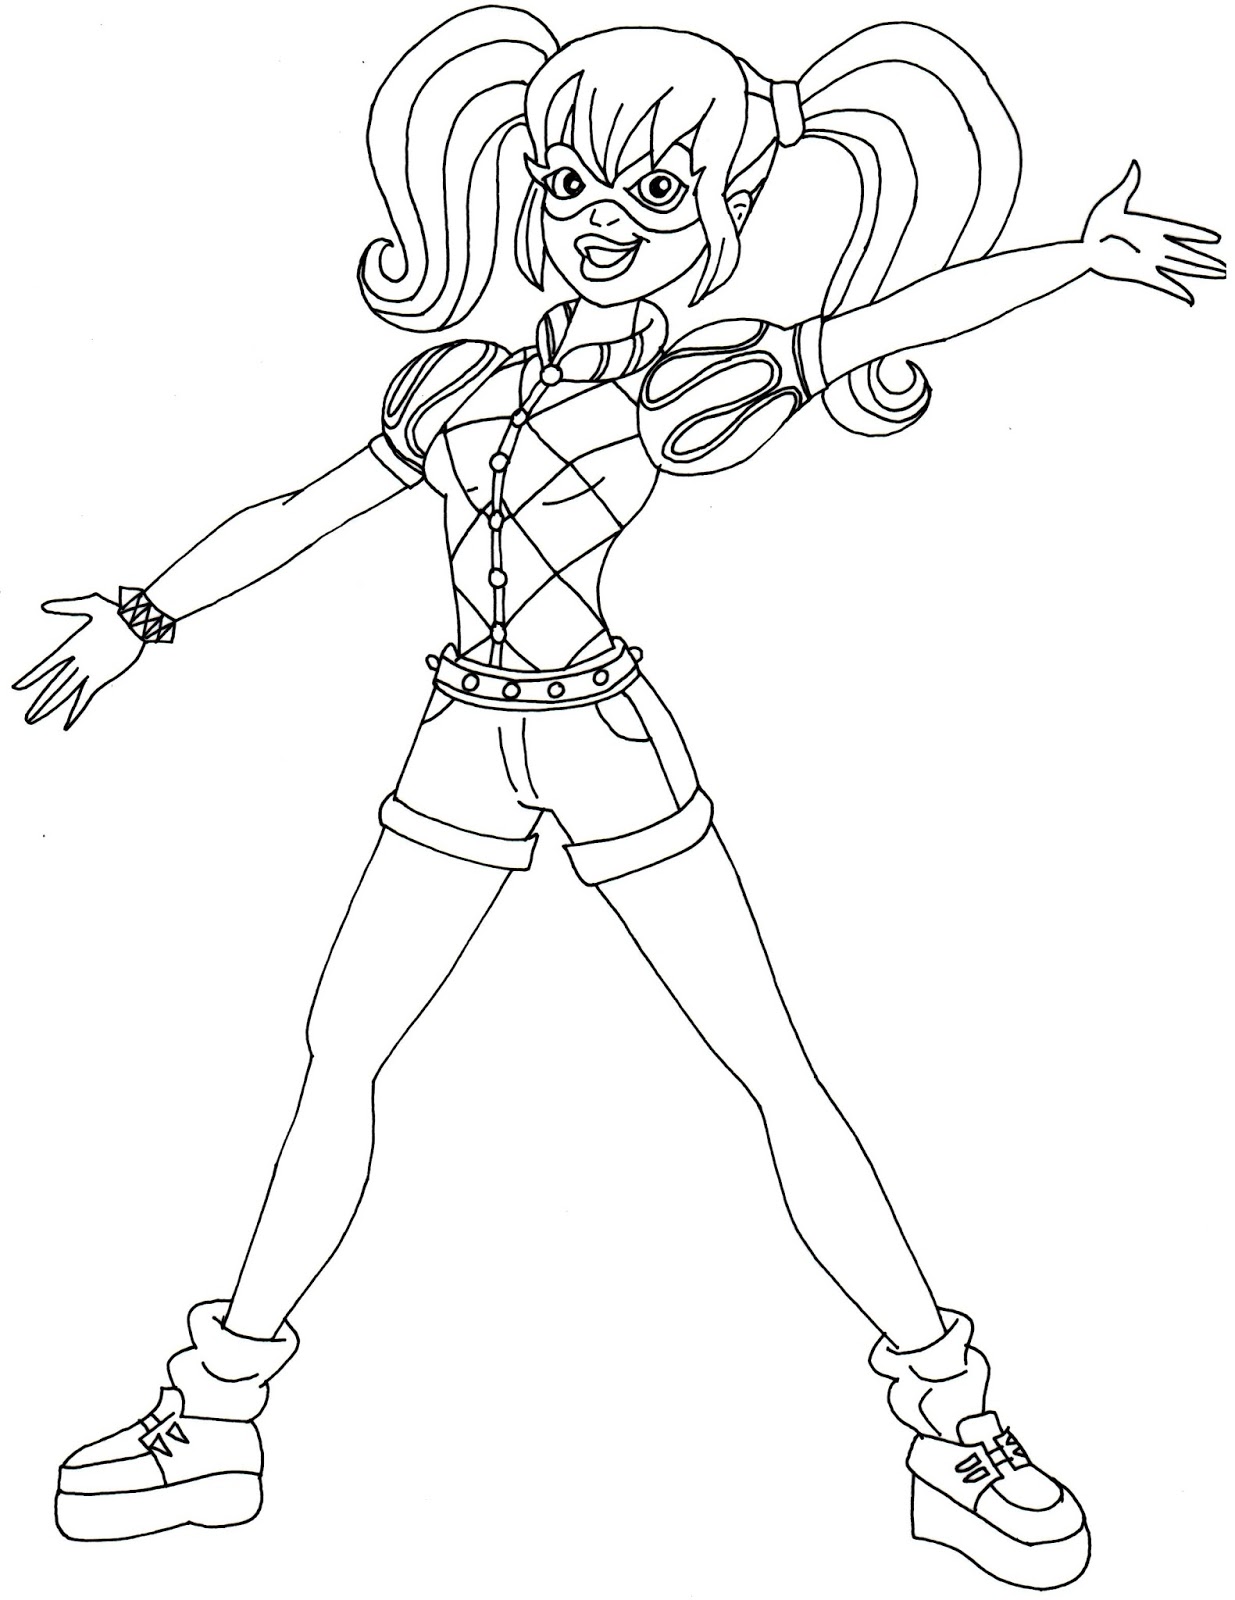 Harley quinn coloring pages